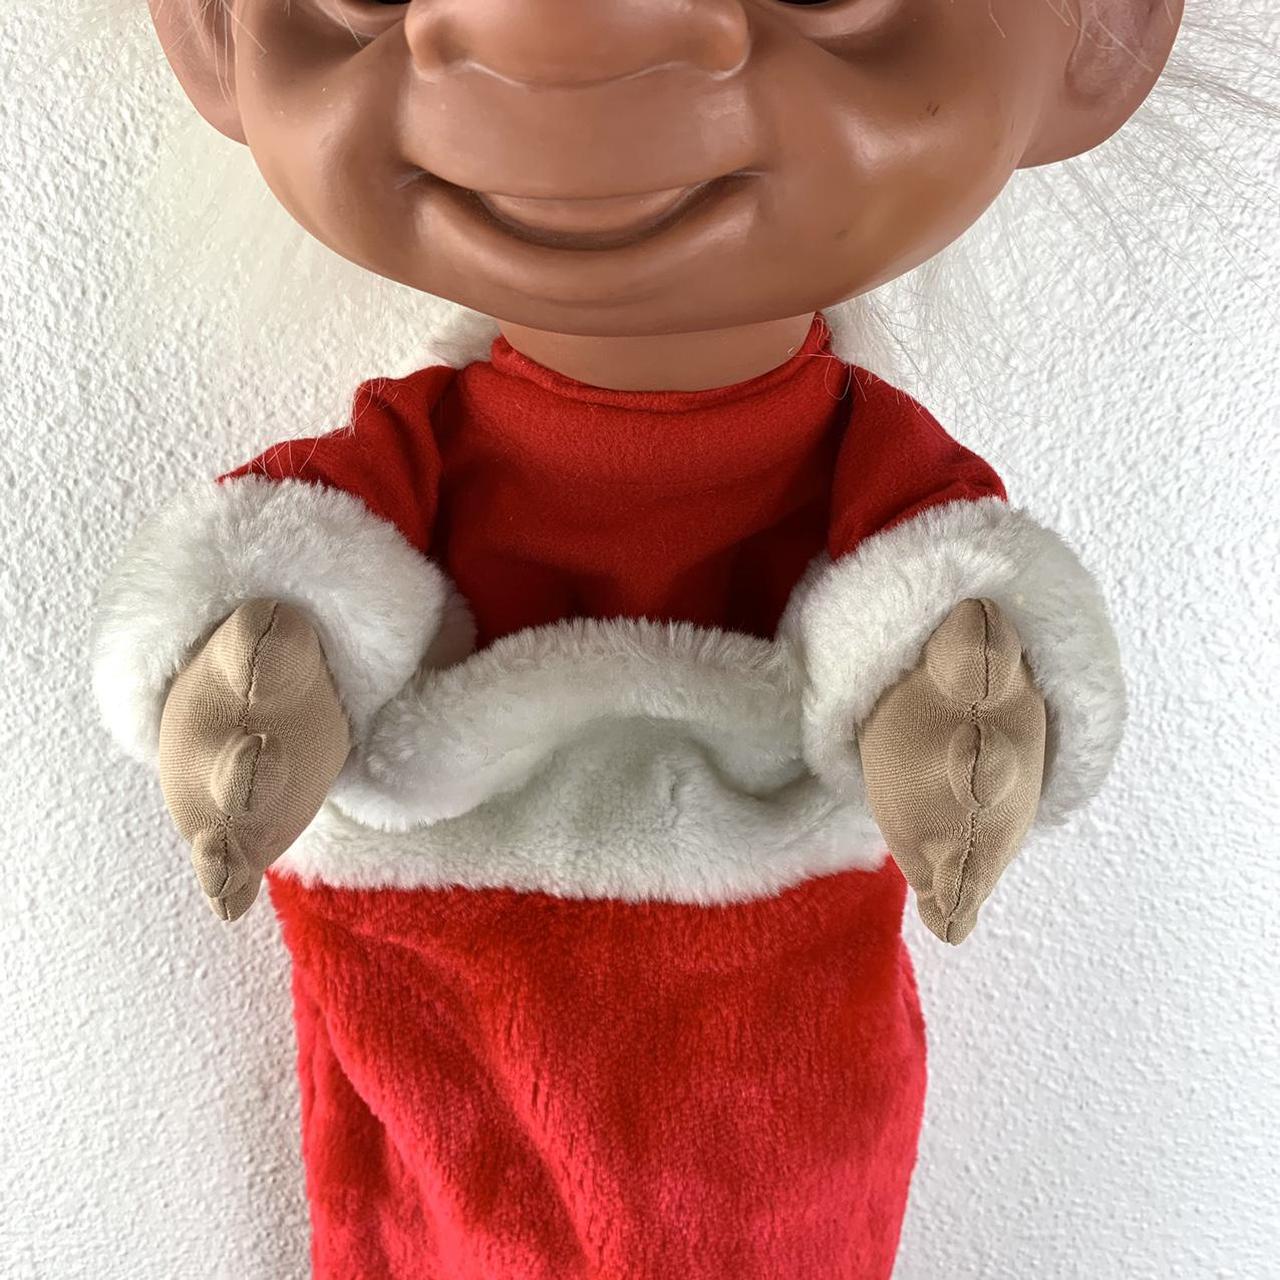 Troll Doll Christmas Stocking red Plush With White Hair Smiling Rubber Head  and Red Stocking With Hands Grasping, Vintage Trolls DAM 